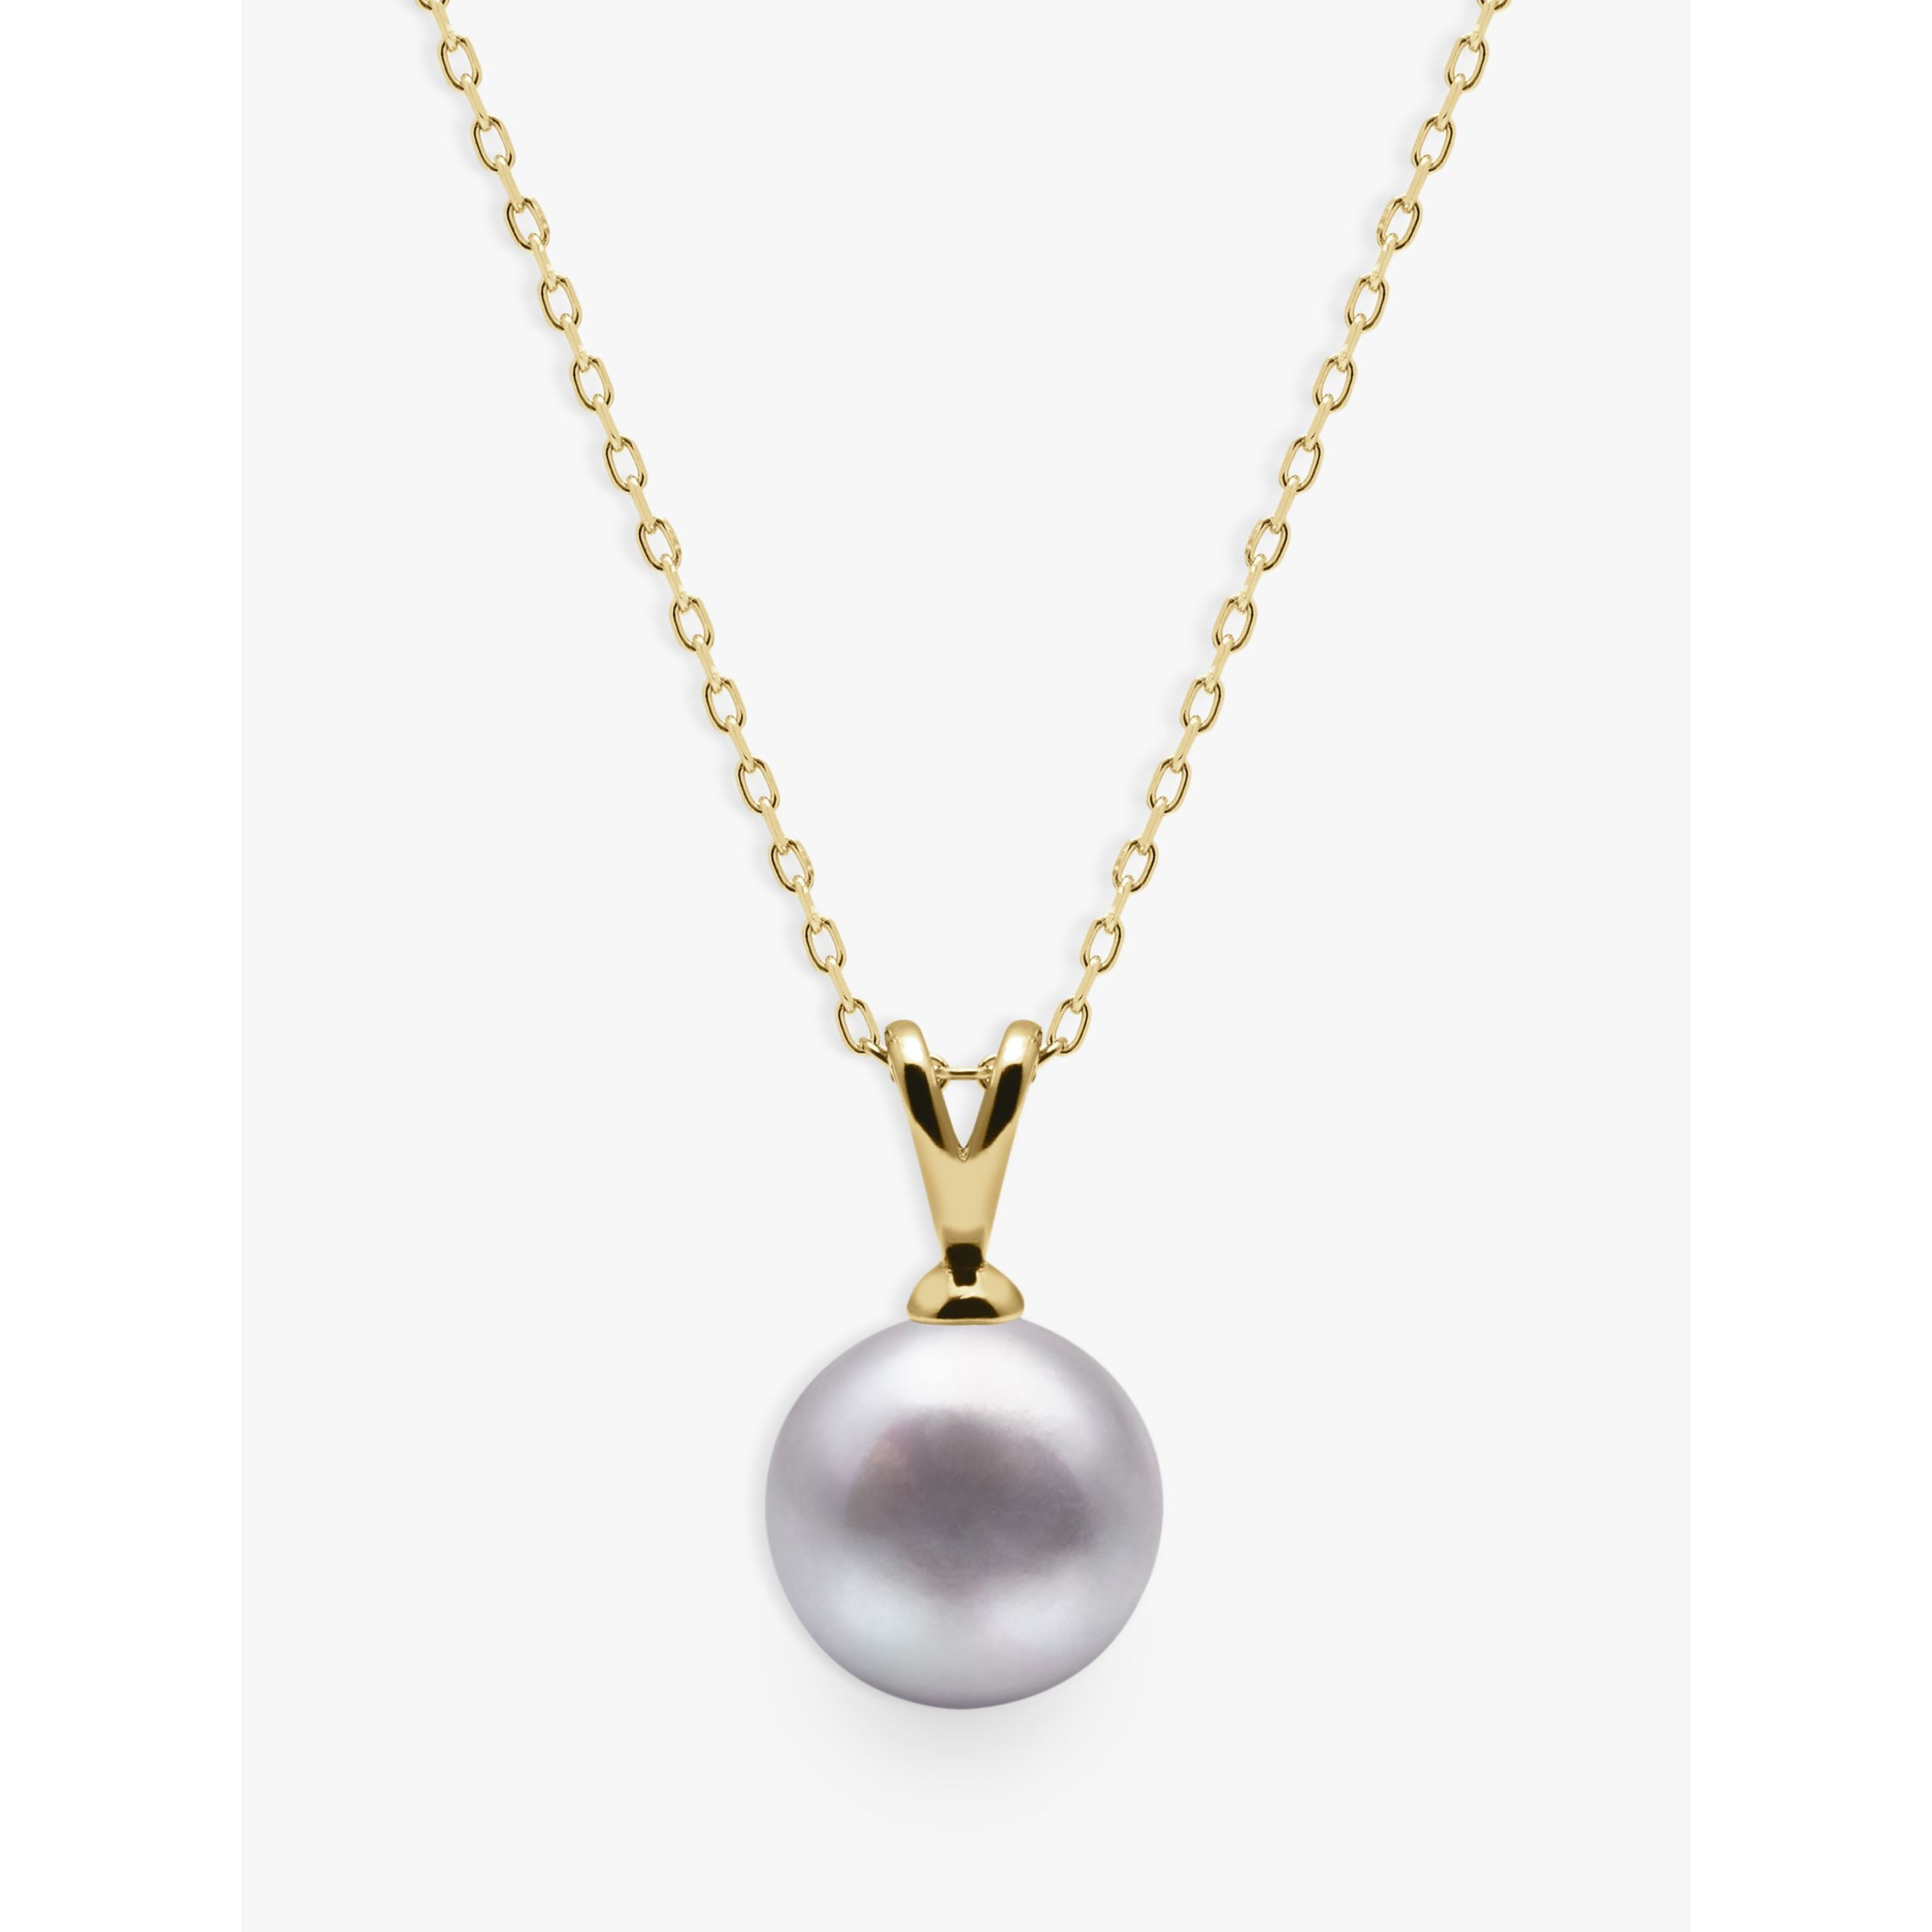 A B Davis Akoya Cultured Pearl Necklace, White/Gold at John Lewis & Partners